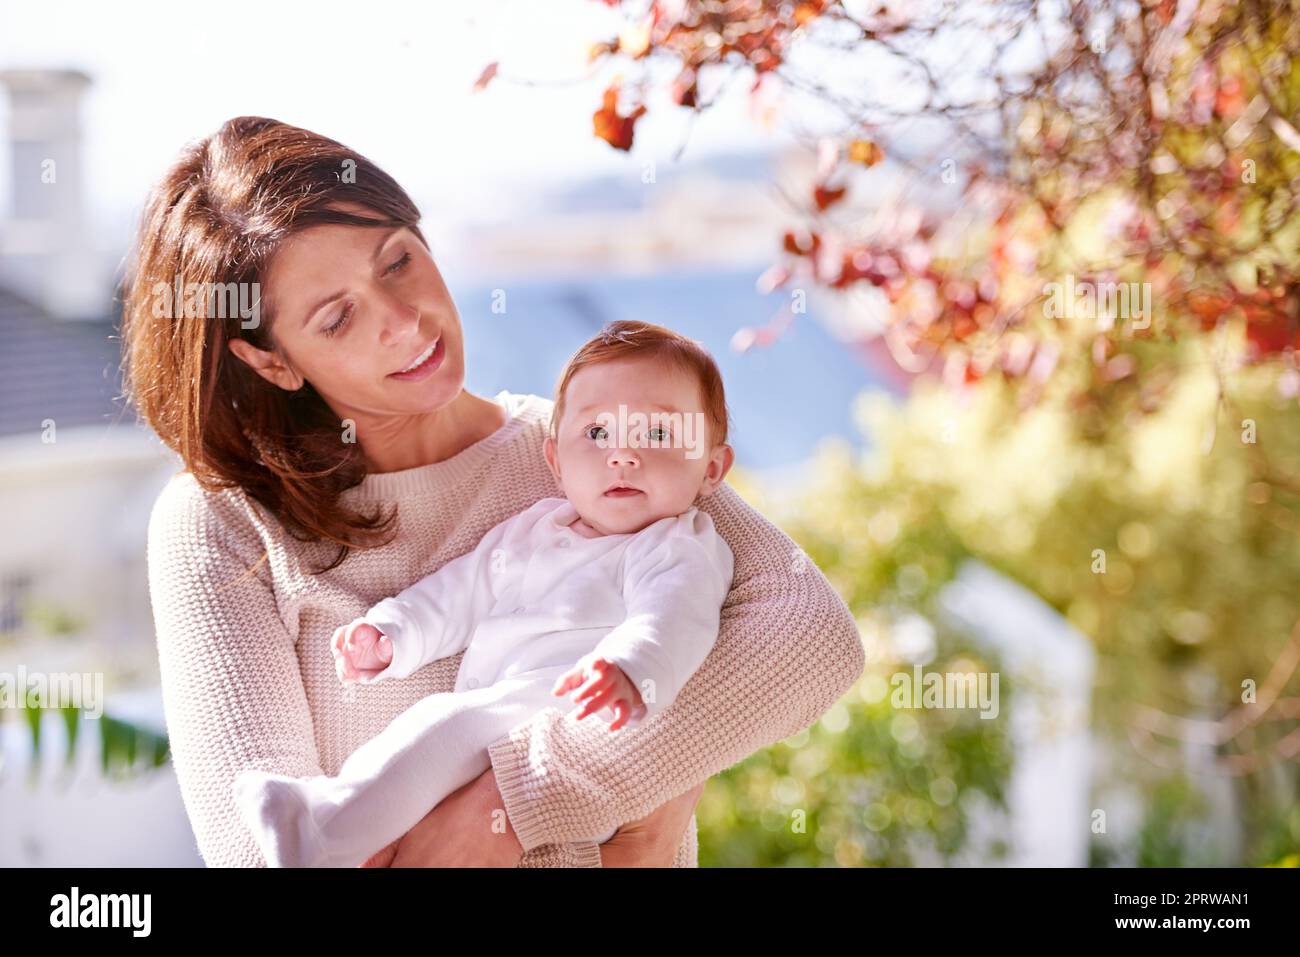 Shes her pride and joy. A woman holding her cute baby outdoors. Stock Photo